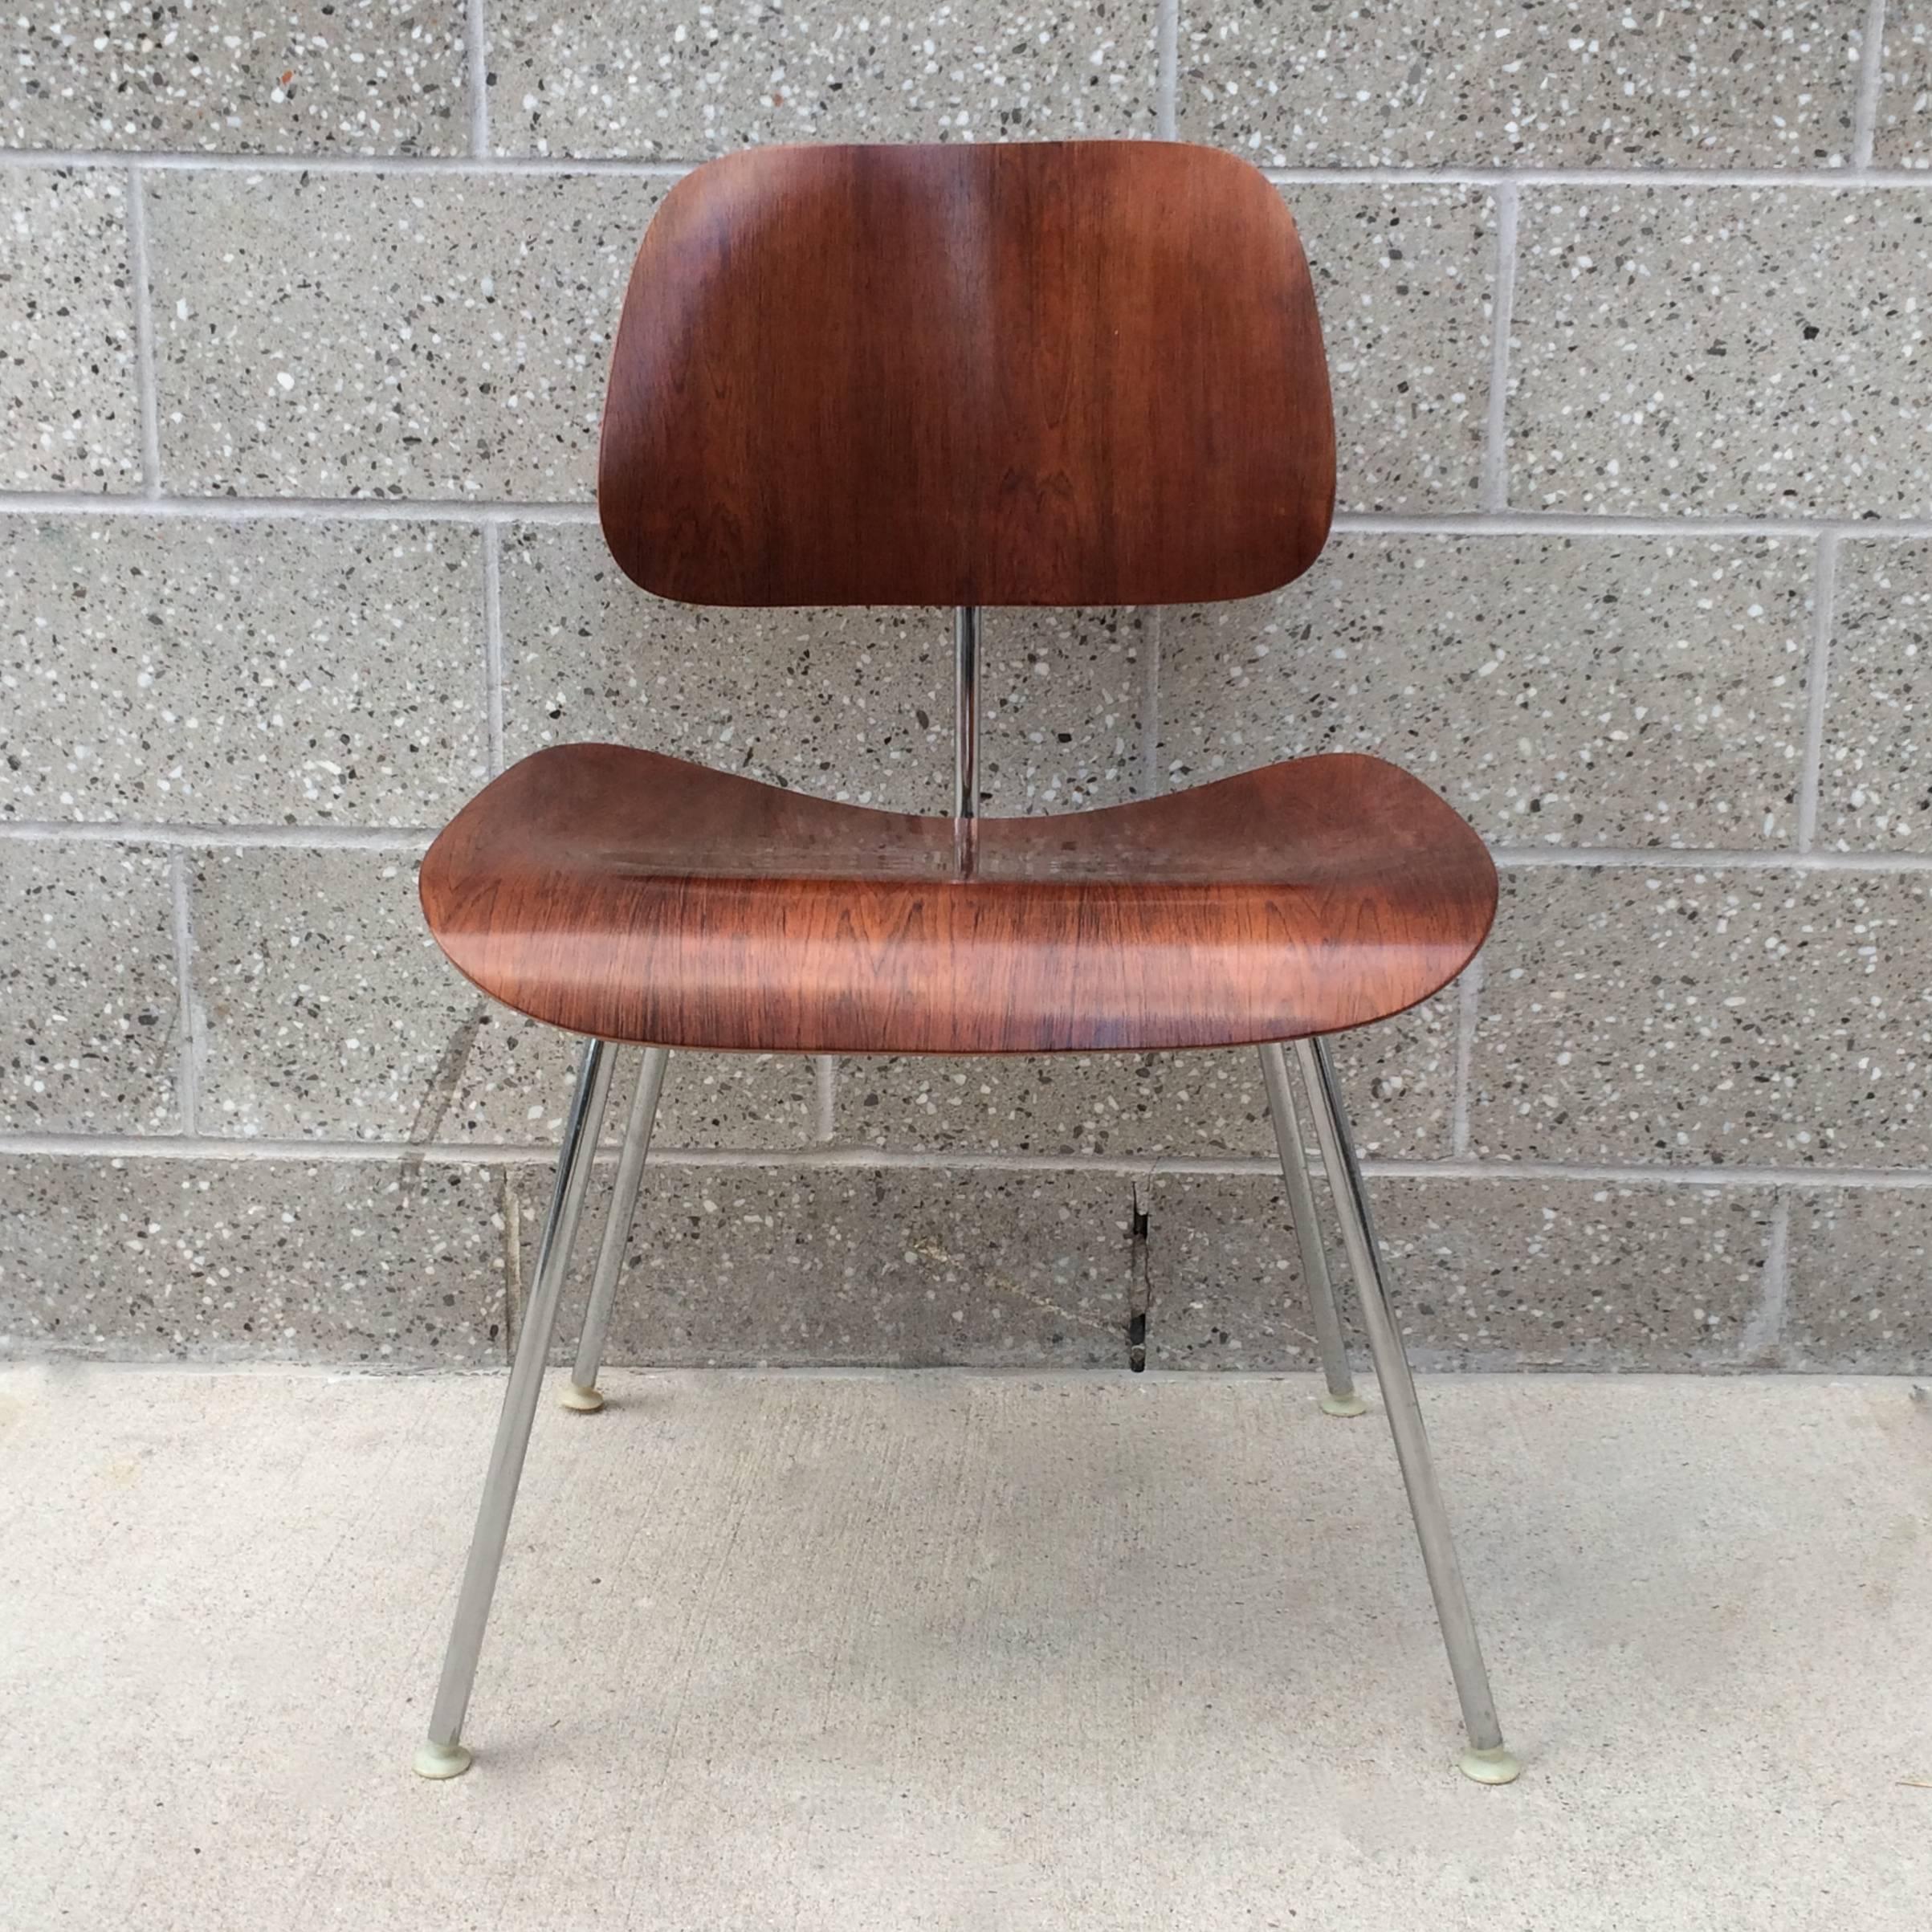 Herman Miller Eames rosewood DCM. Rich color and grains. Frame in excellent condition with no rust. Back mounts were replaced. No veneer damage.